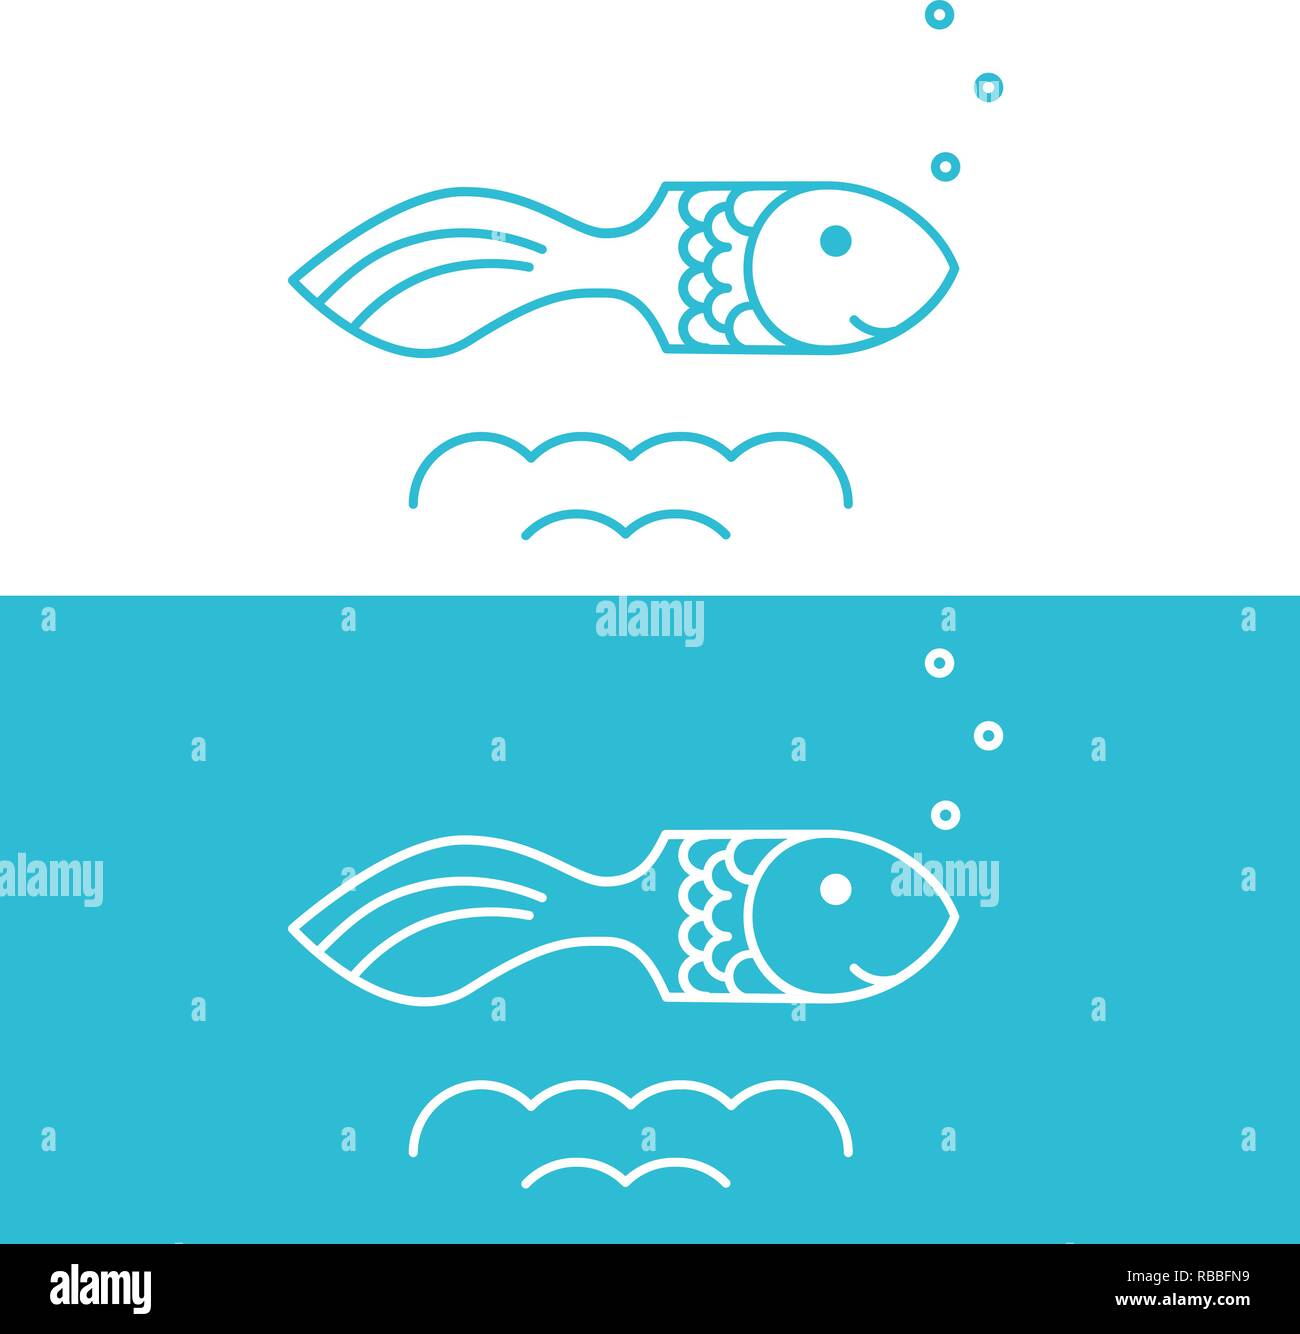 Vector drawing fish on blue and white background, logo for a  restaurant, bar, market, online store, website. Stock Vector